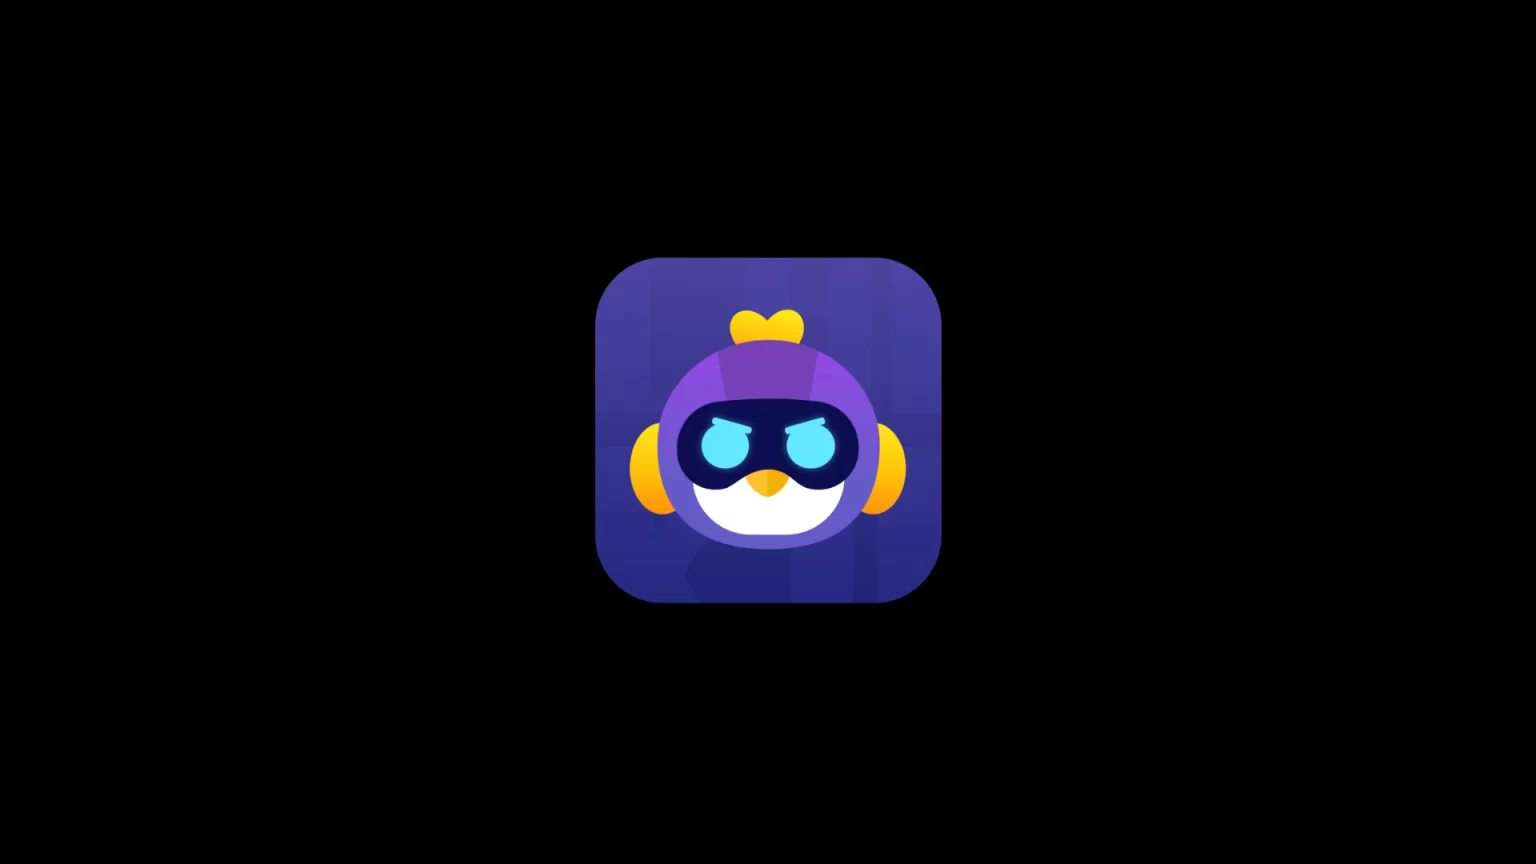 990980 3 1 1536x864 - Chikii Mod Apk V3.2.1 (Unlimited Coins and Time) Latest Version